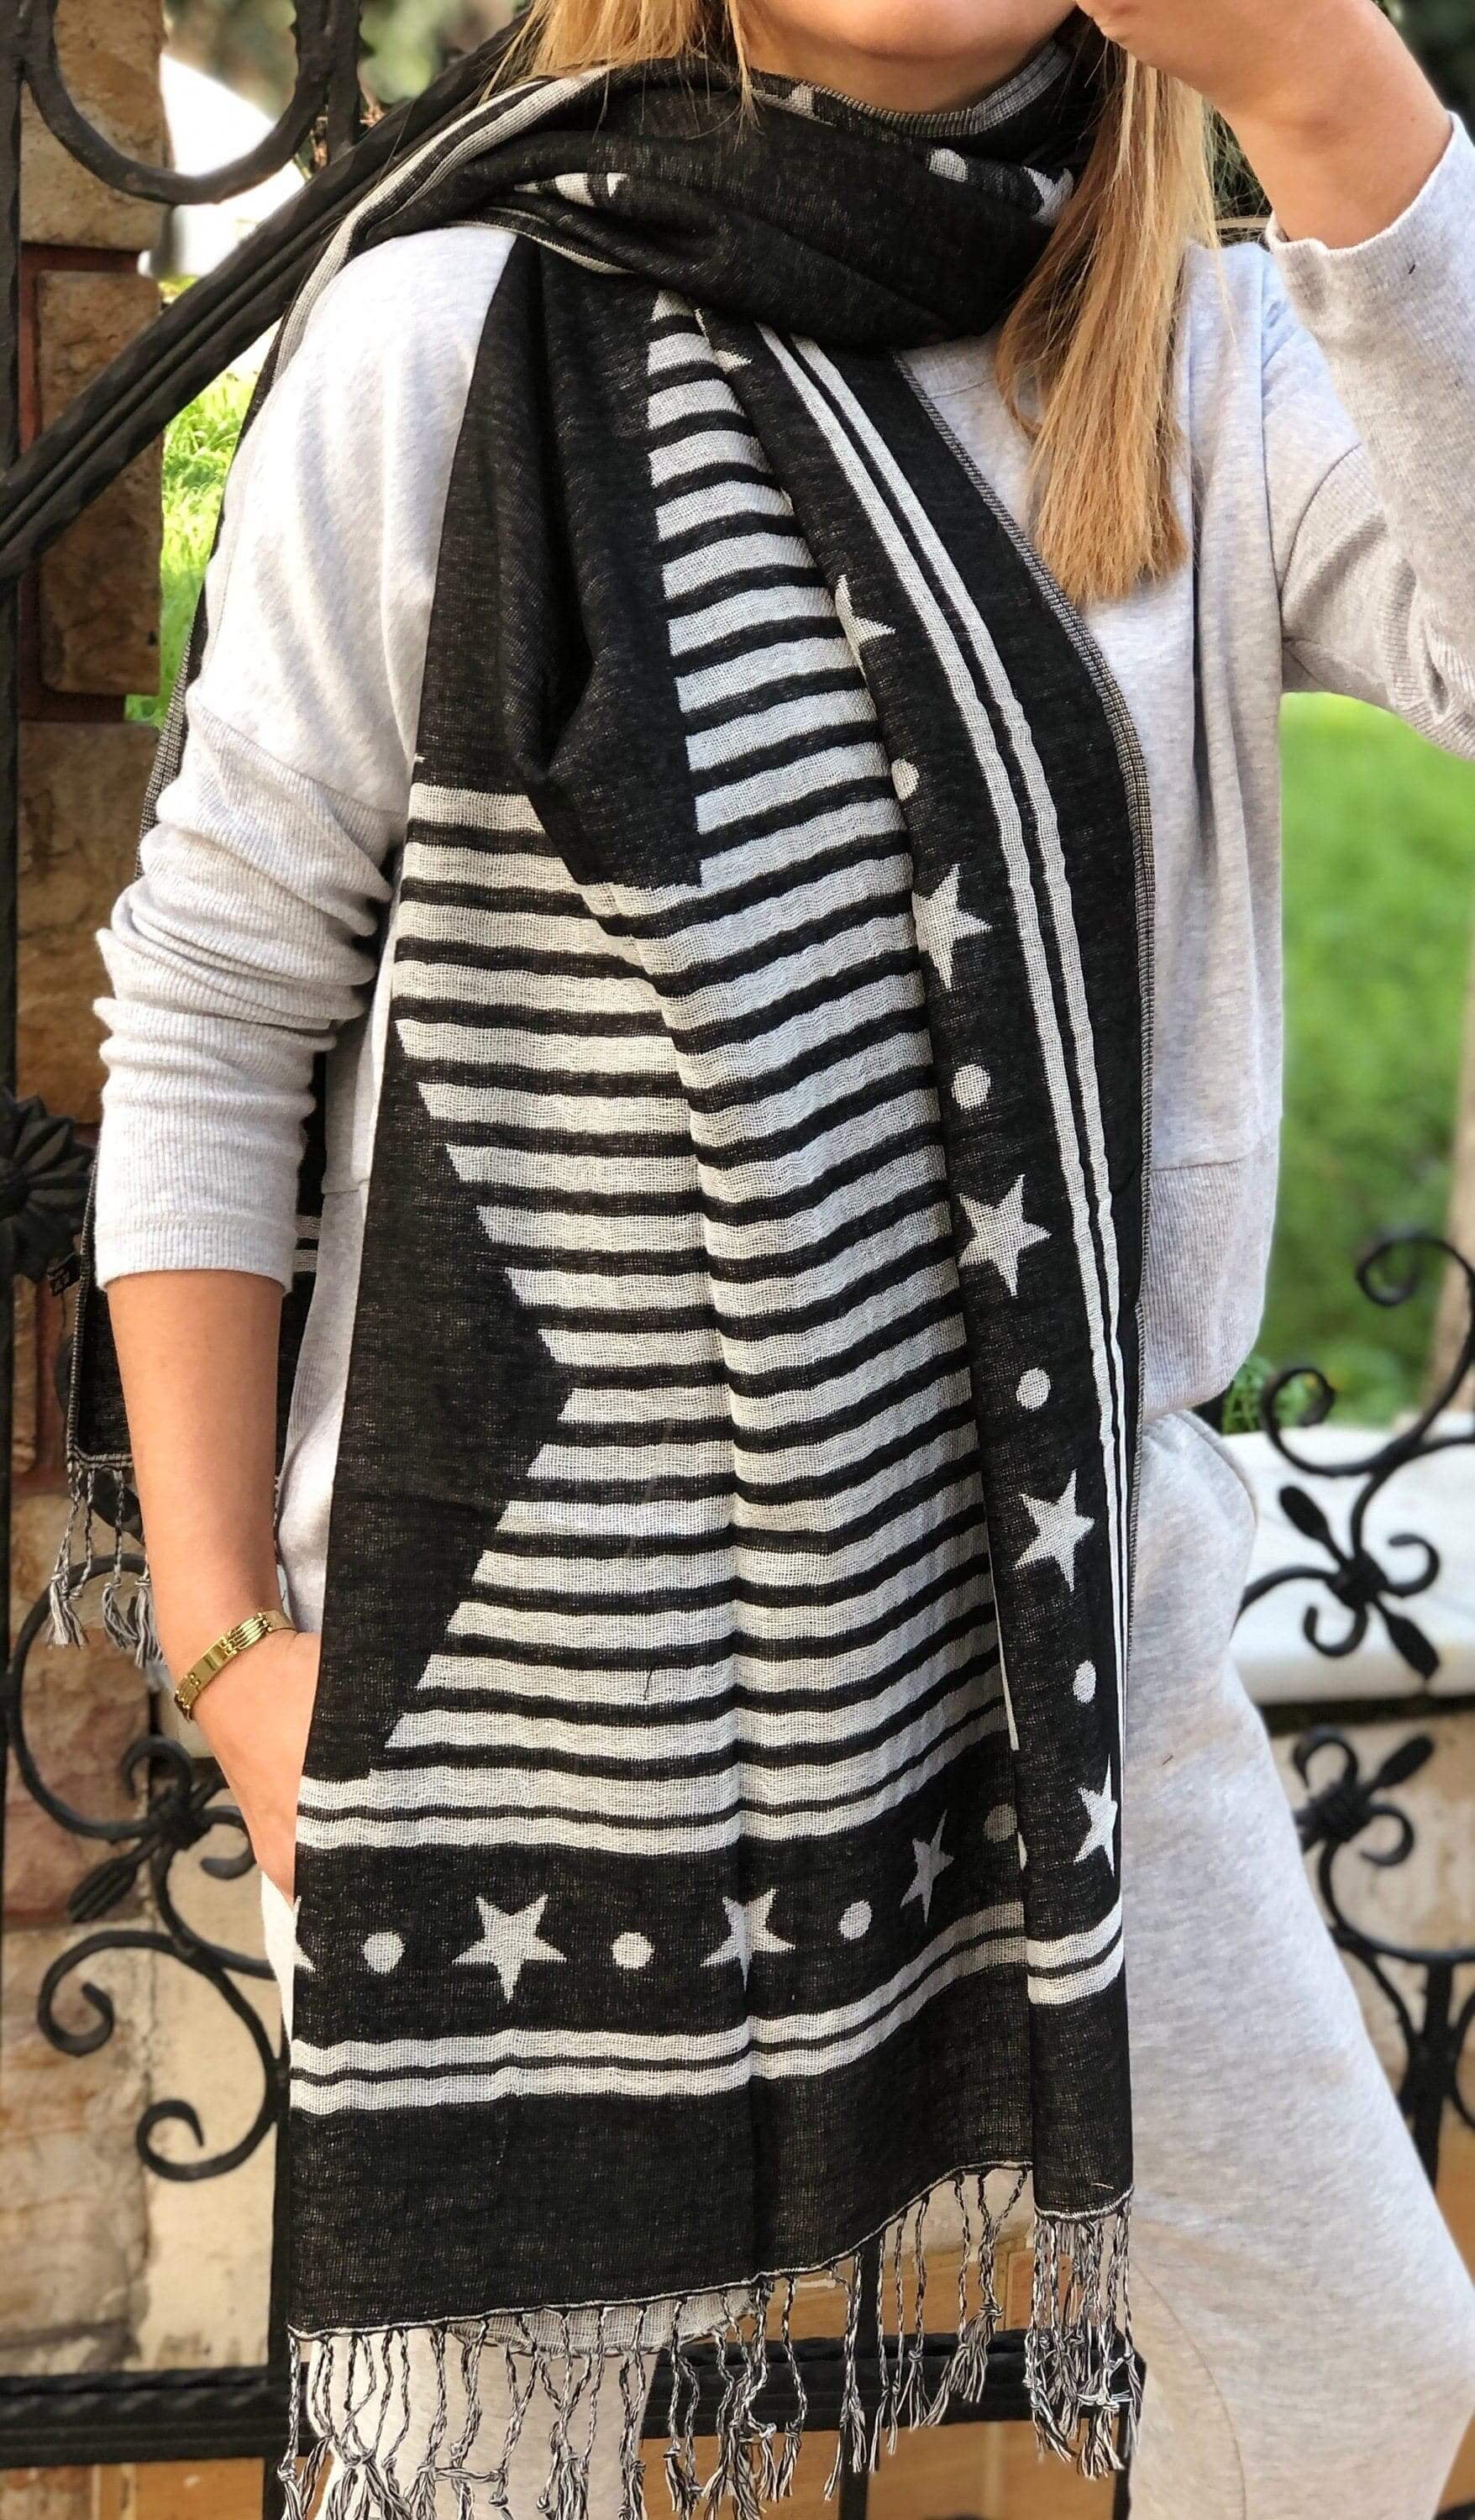 Elegant Black & White Acrylic Scarf: An elegant and timeless black and white acrylic scarf, perfect for dressing up any outfit. Made with soft and comfortable material, this scarf is a must-have accessory for any fashion-forward woman.